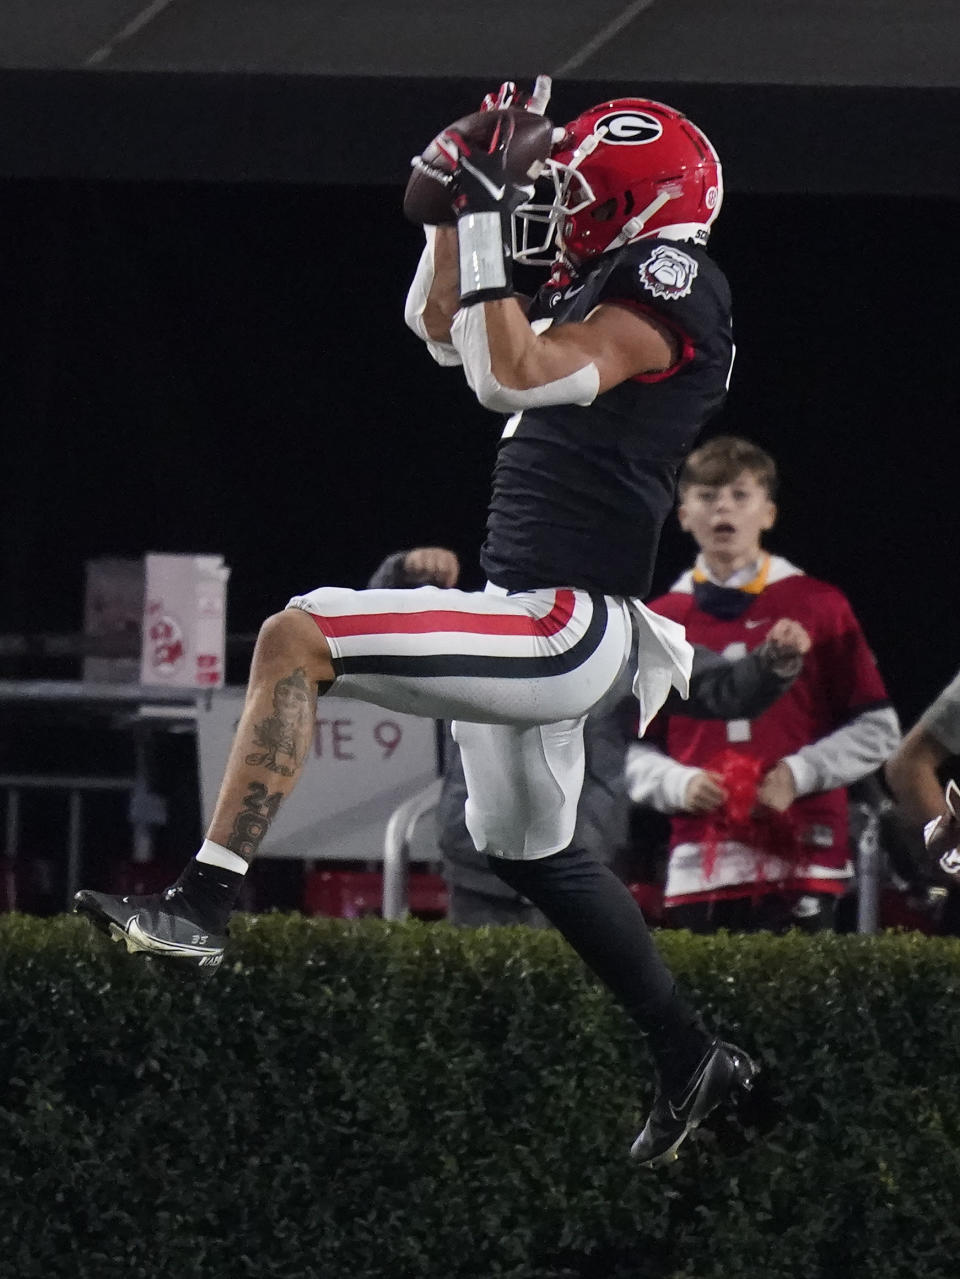 Georgia wide receiver Jermaine Burton makes a touchdown reception against Mississippi State during the first half of an NCAA college football game Saturday, Nov. 21, 2020, in Athens, Ga. (AP Photo/Brynn Anderson)